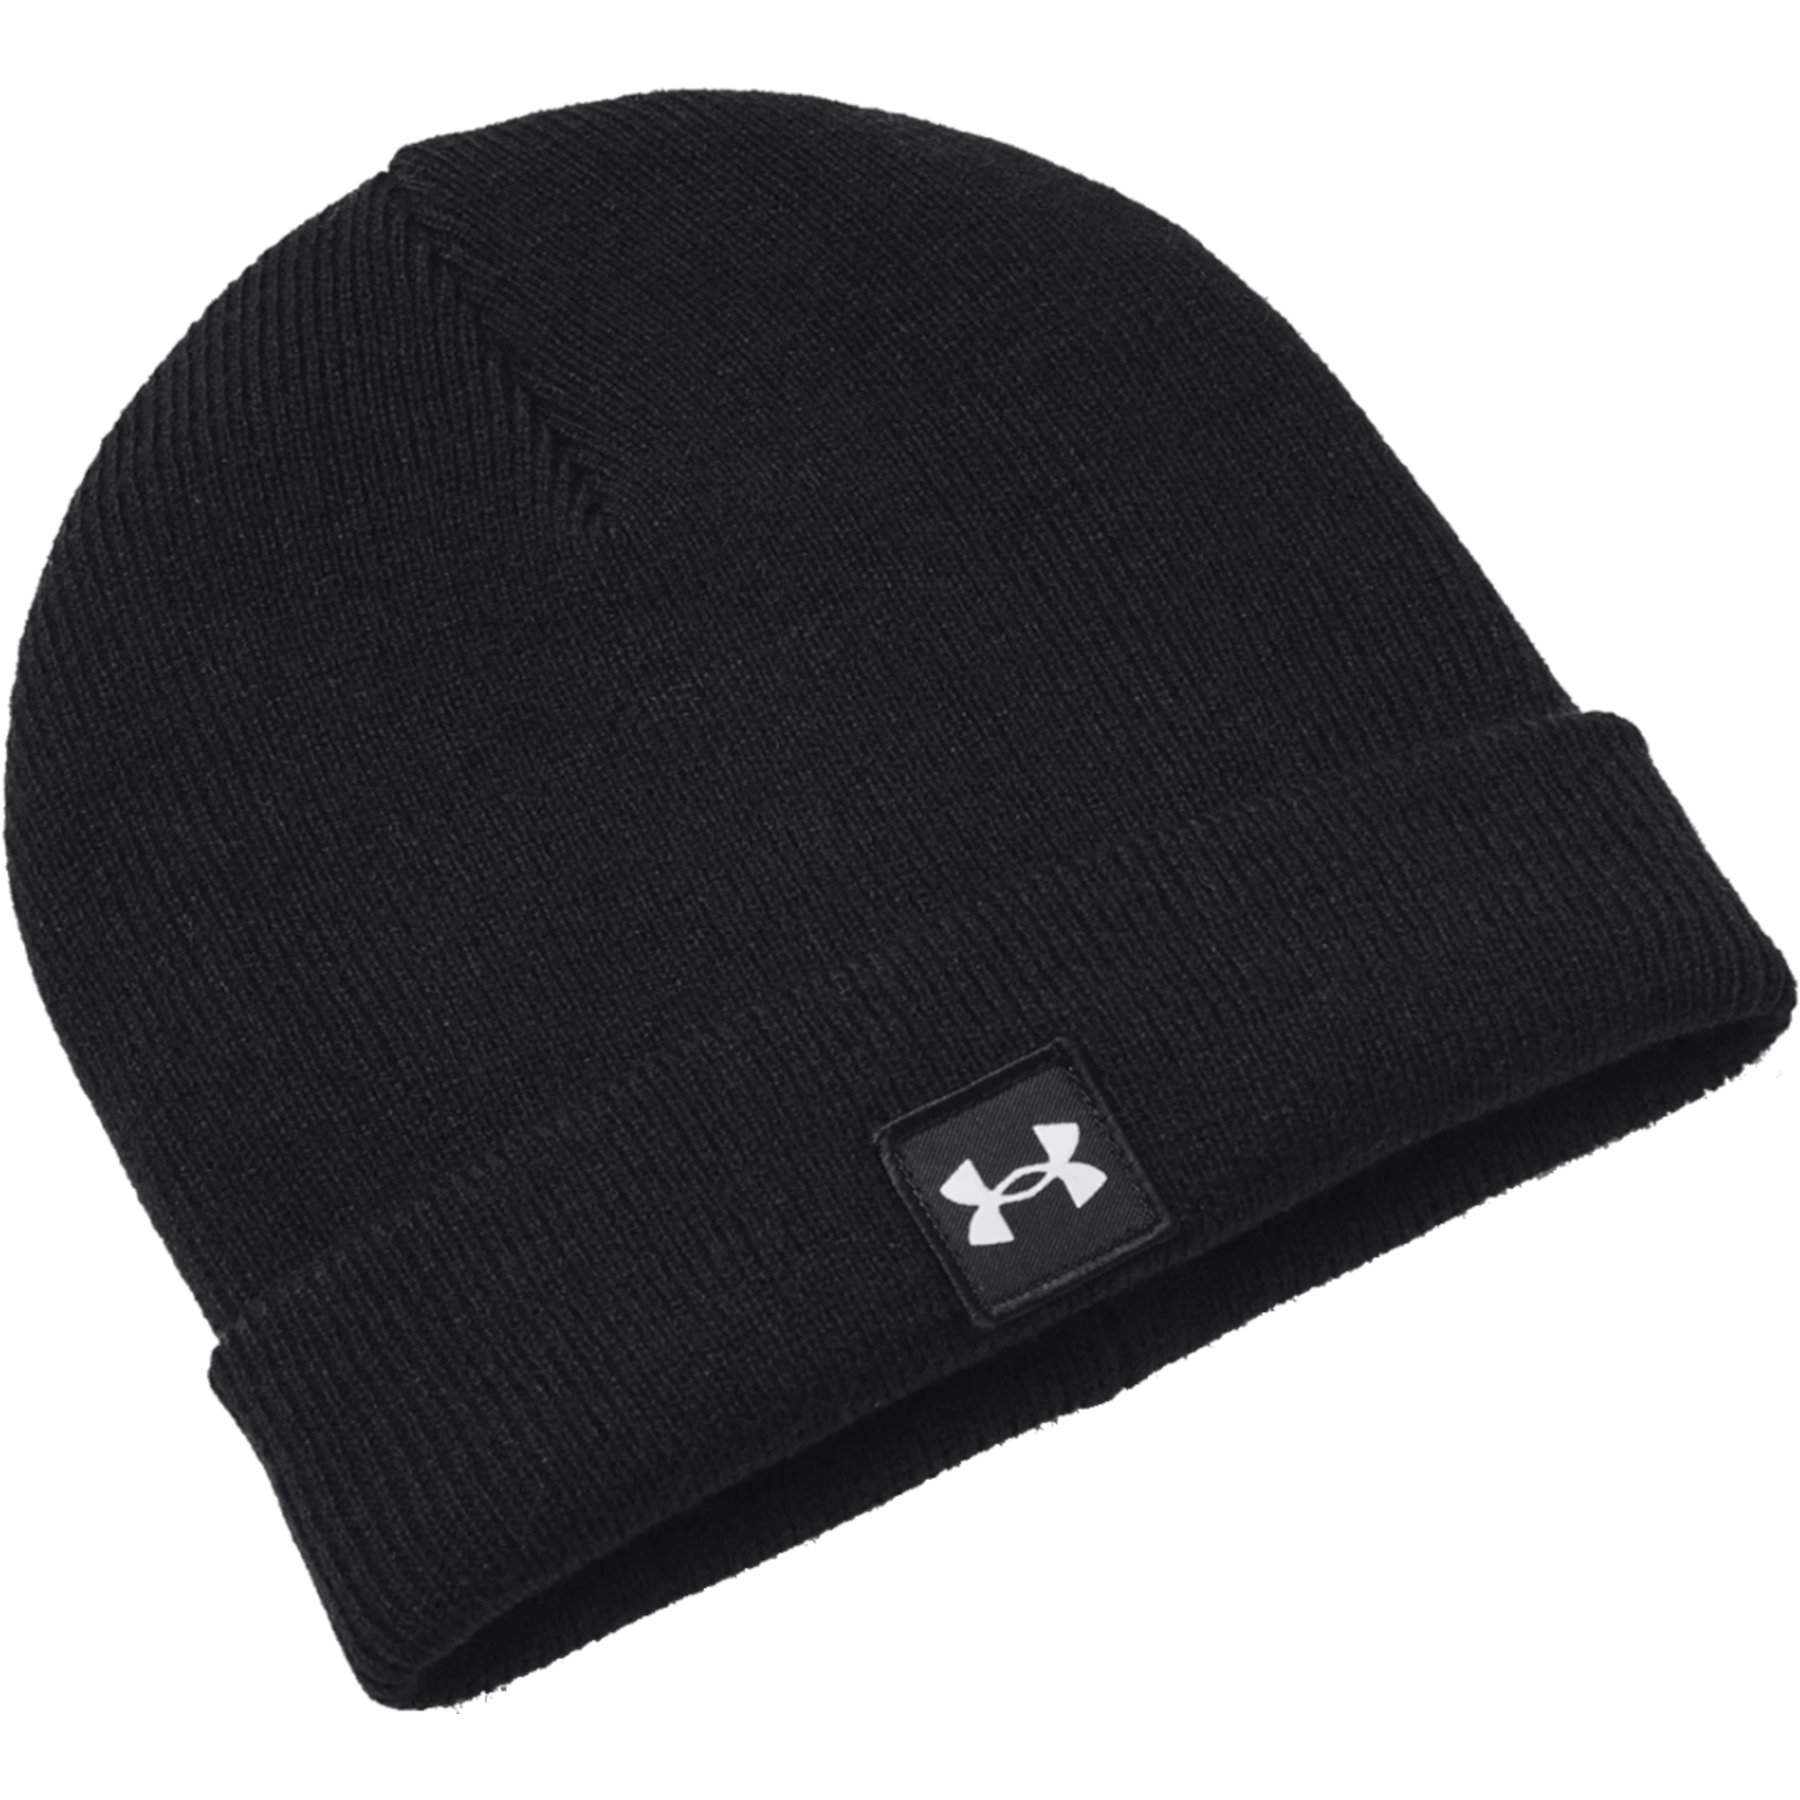 Picture of Under Armour UA Halftime Shallow Cuff Beanie Men - Black/White